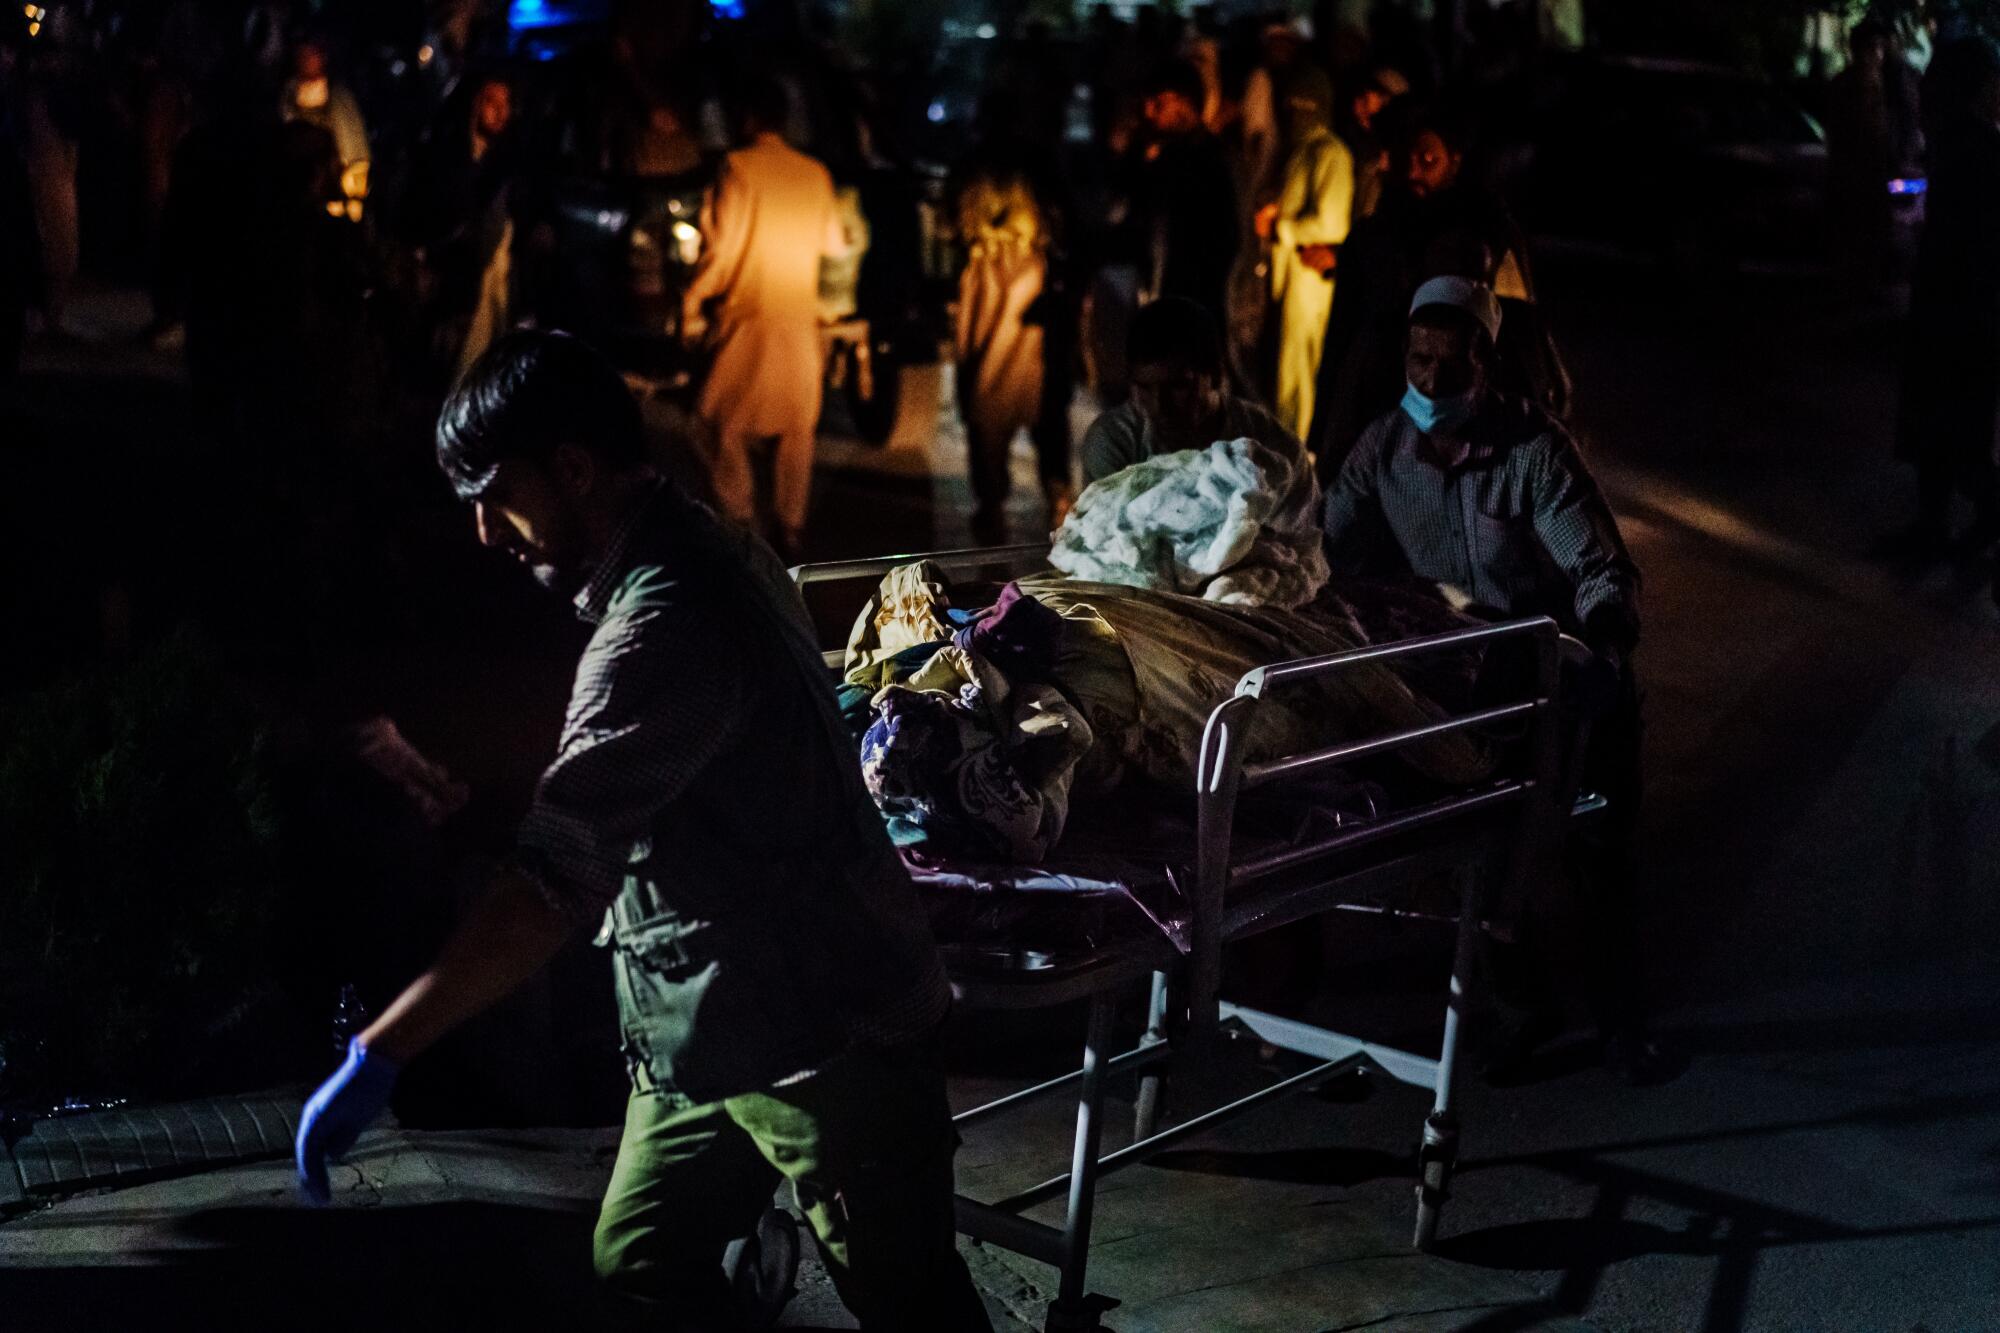 Hospital staff rolls a patient on a gurney in the darkness